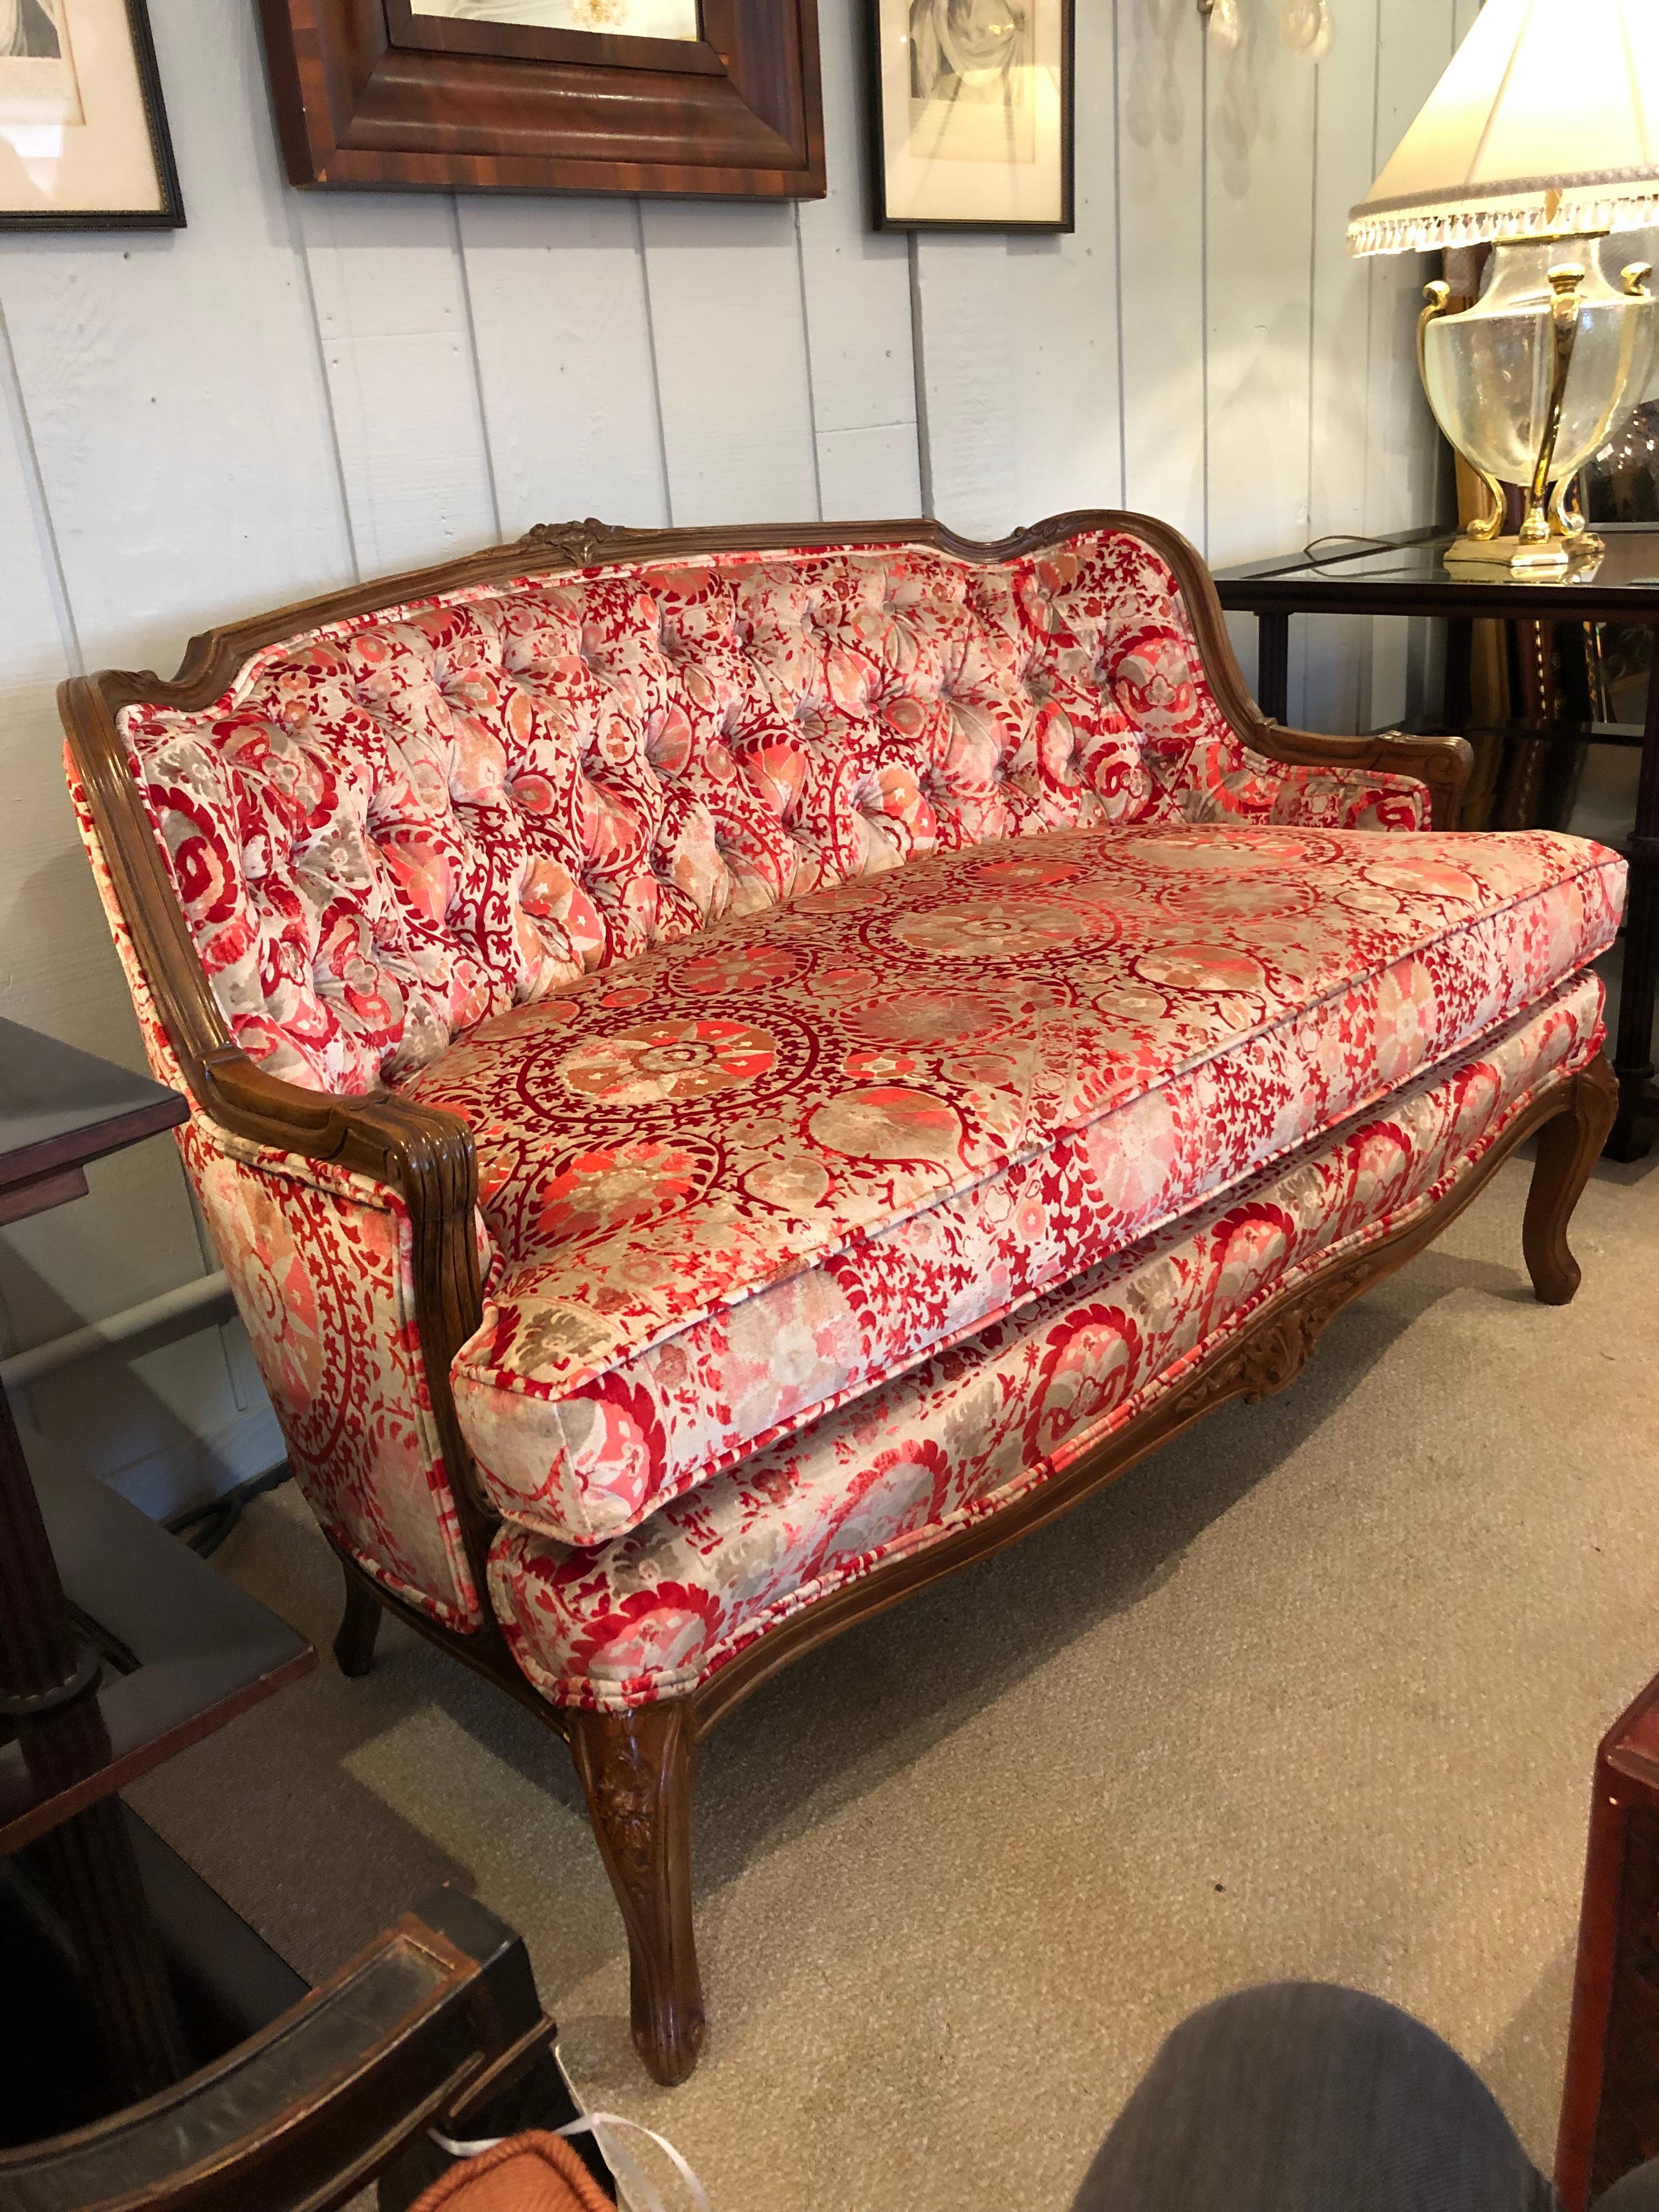 Early 20th Century Antique Carved Walnut Tufted Small Settee Loveseat Upholstered in Velvet For Sale